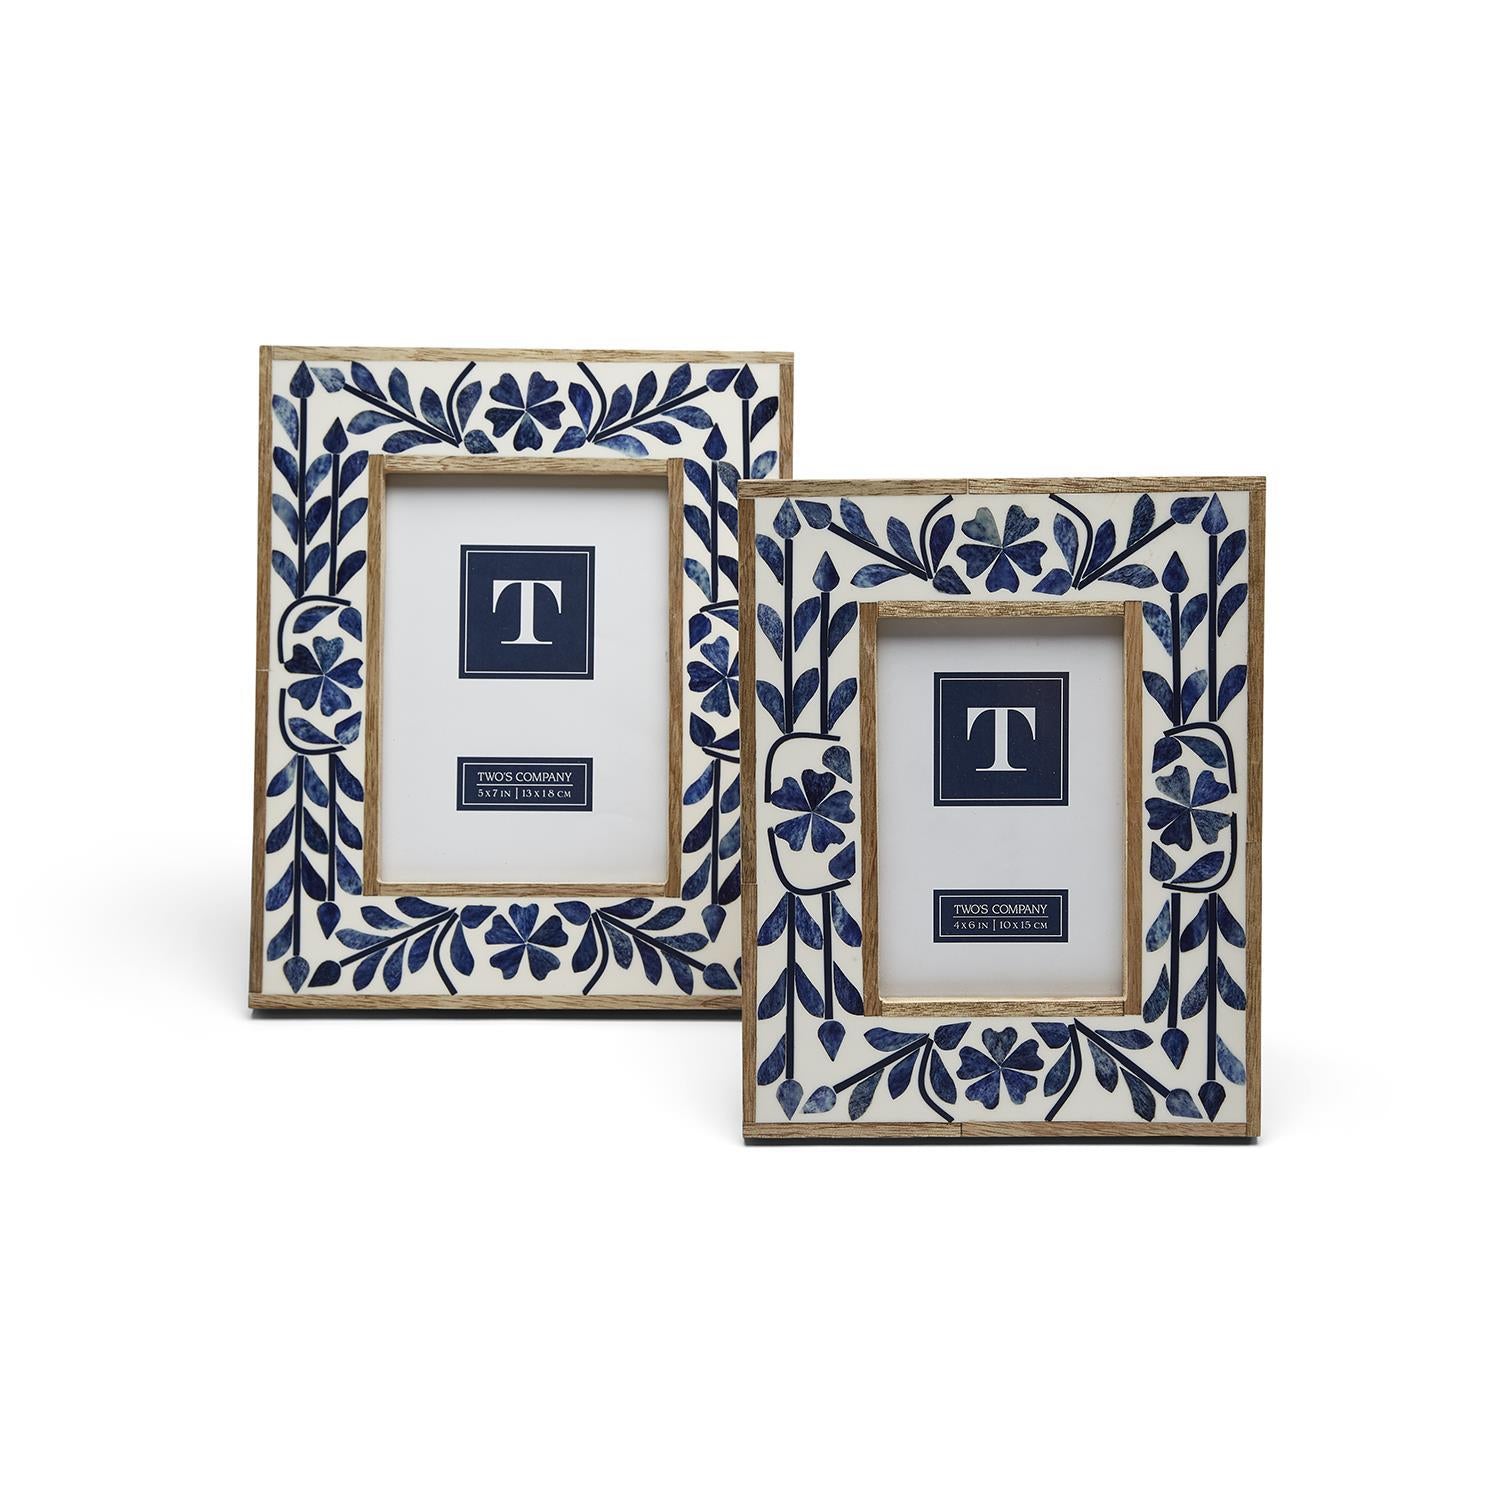 Two's Company S/2 Bone Inlay Photo Frames Includes 2 Sizes